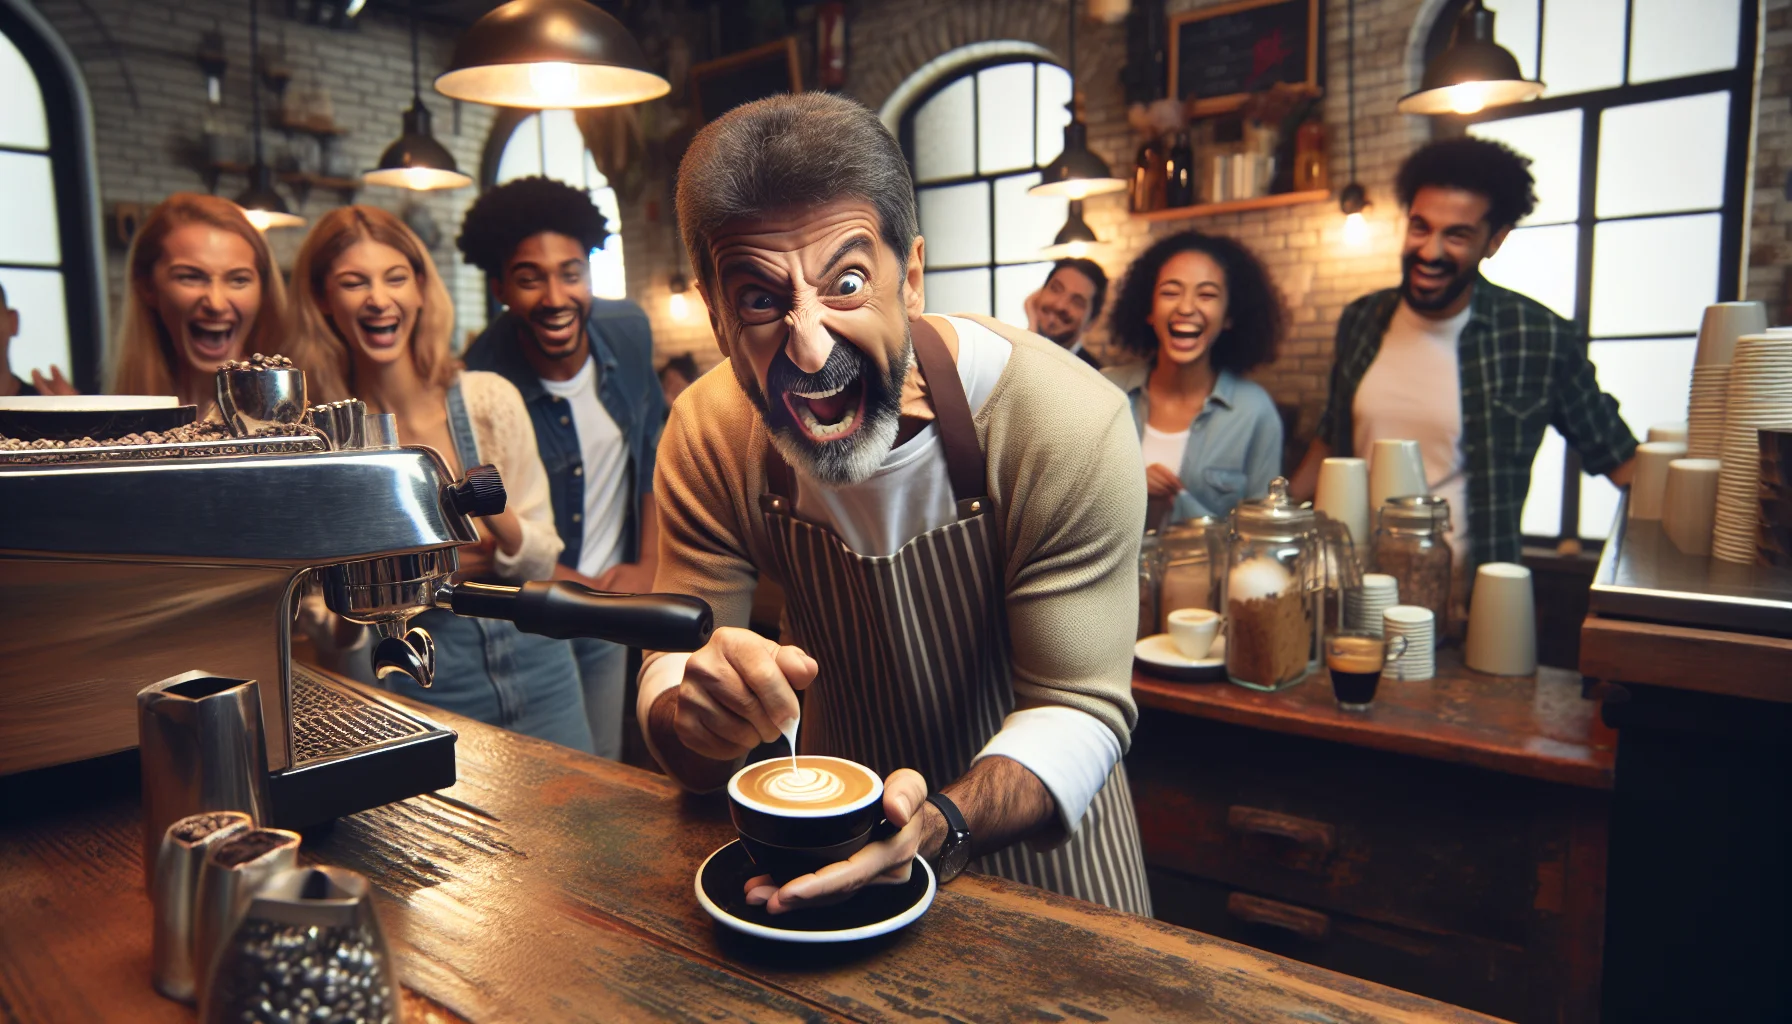 Create an image of a barista with a charismatic personality,catching attention in a humorous way. The barista, a middle-aged man of Middle-Eastern descent, stands behind the counter of a quaint, rustic coffee shop. He's making an overly-exaggerated face while swirling foam on an espresso, pretending it's a complex science experiment. The customers, a diverse mix of people of various descents and genders, are laughing at his antics. There's a sense of warmth, fun, and camaraderie. Put a spotlight on the humorous interaction, highlighting how his joke enlivens the atmosphere, enticing people to join in the fun and enjoy their coffee.